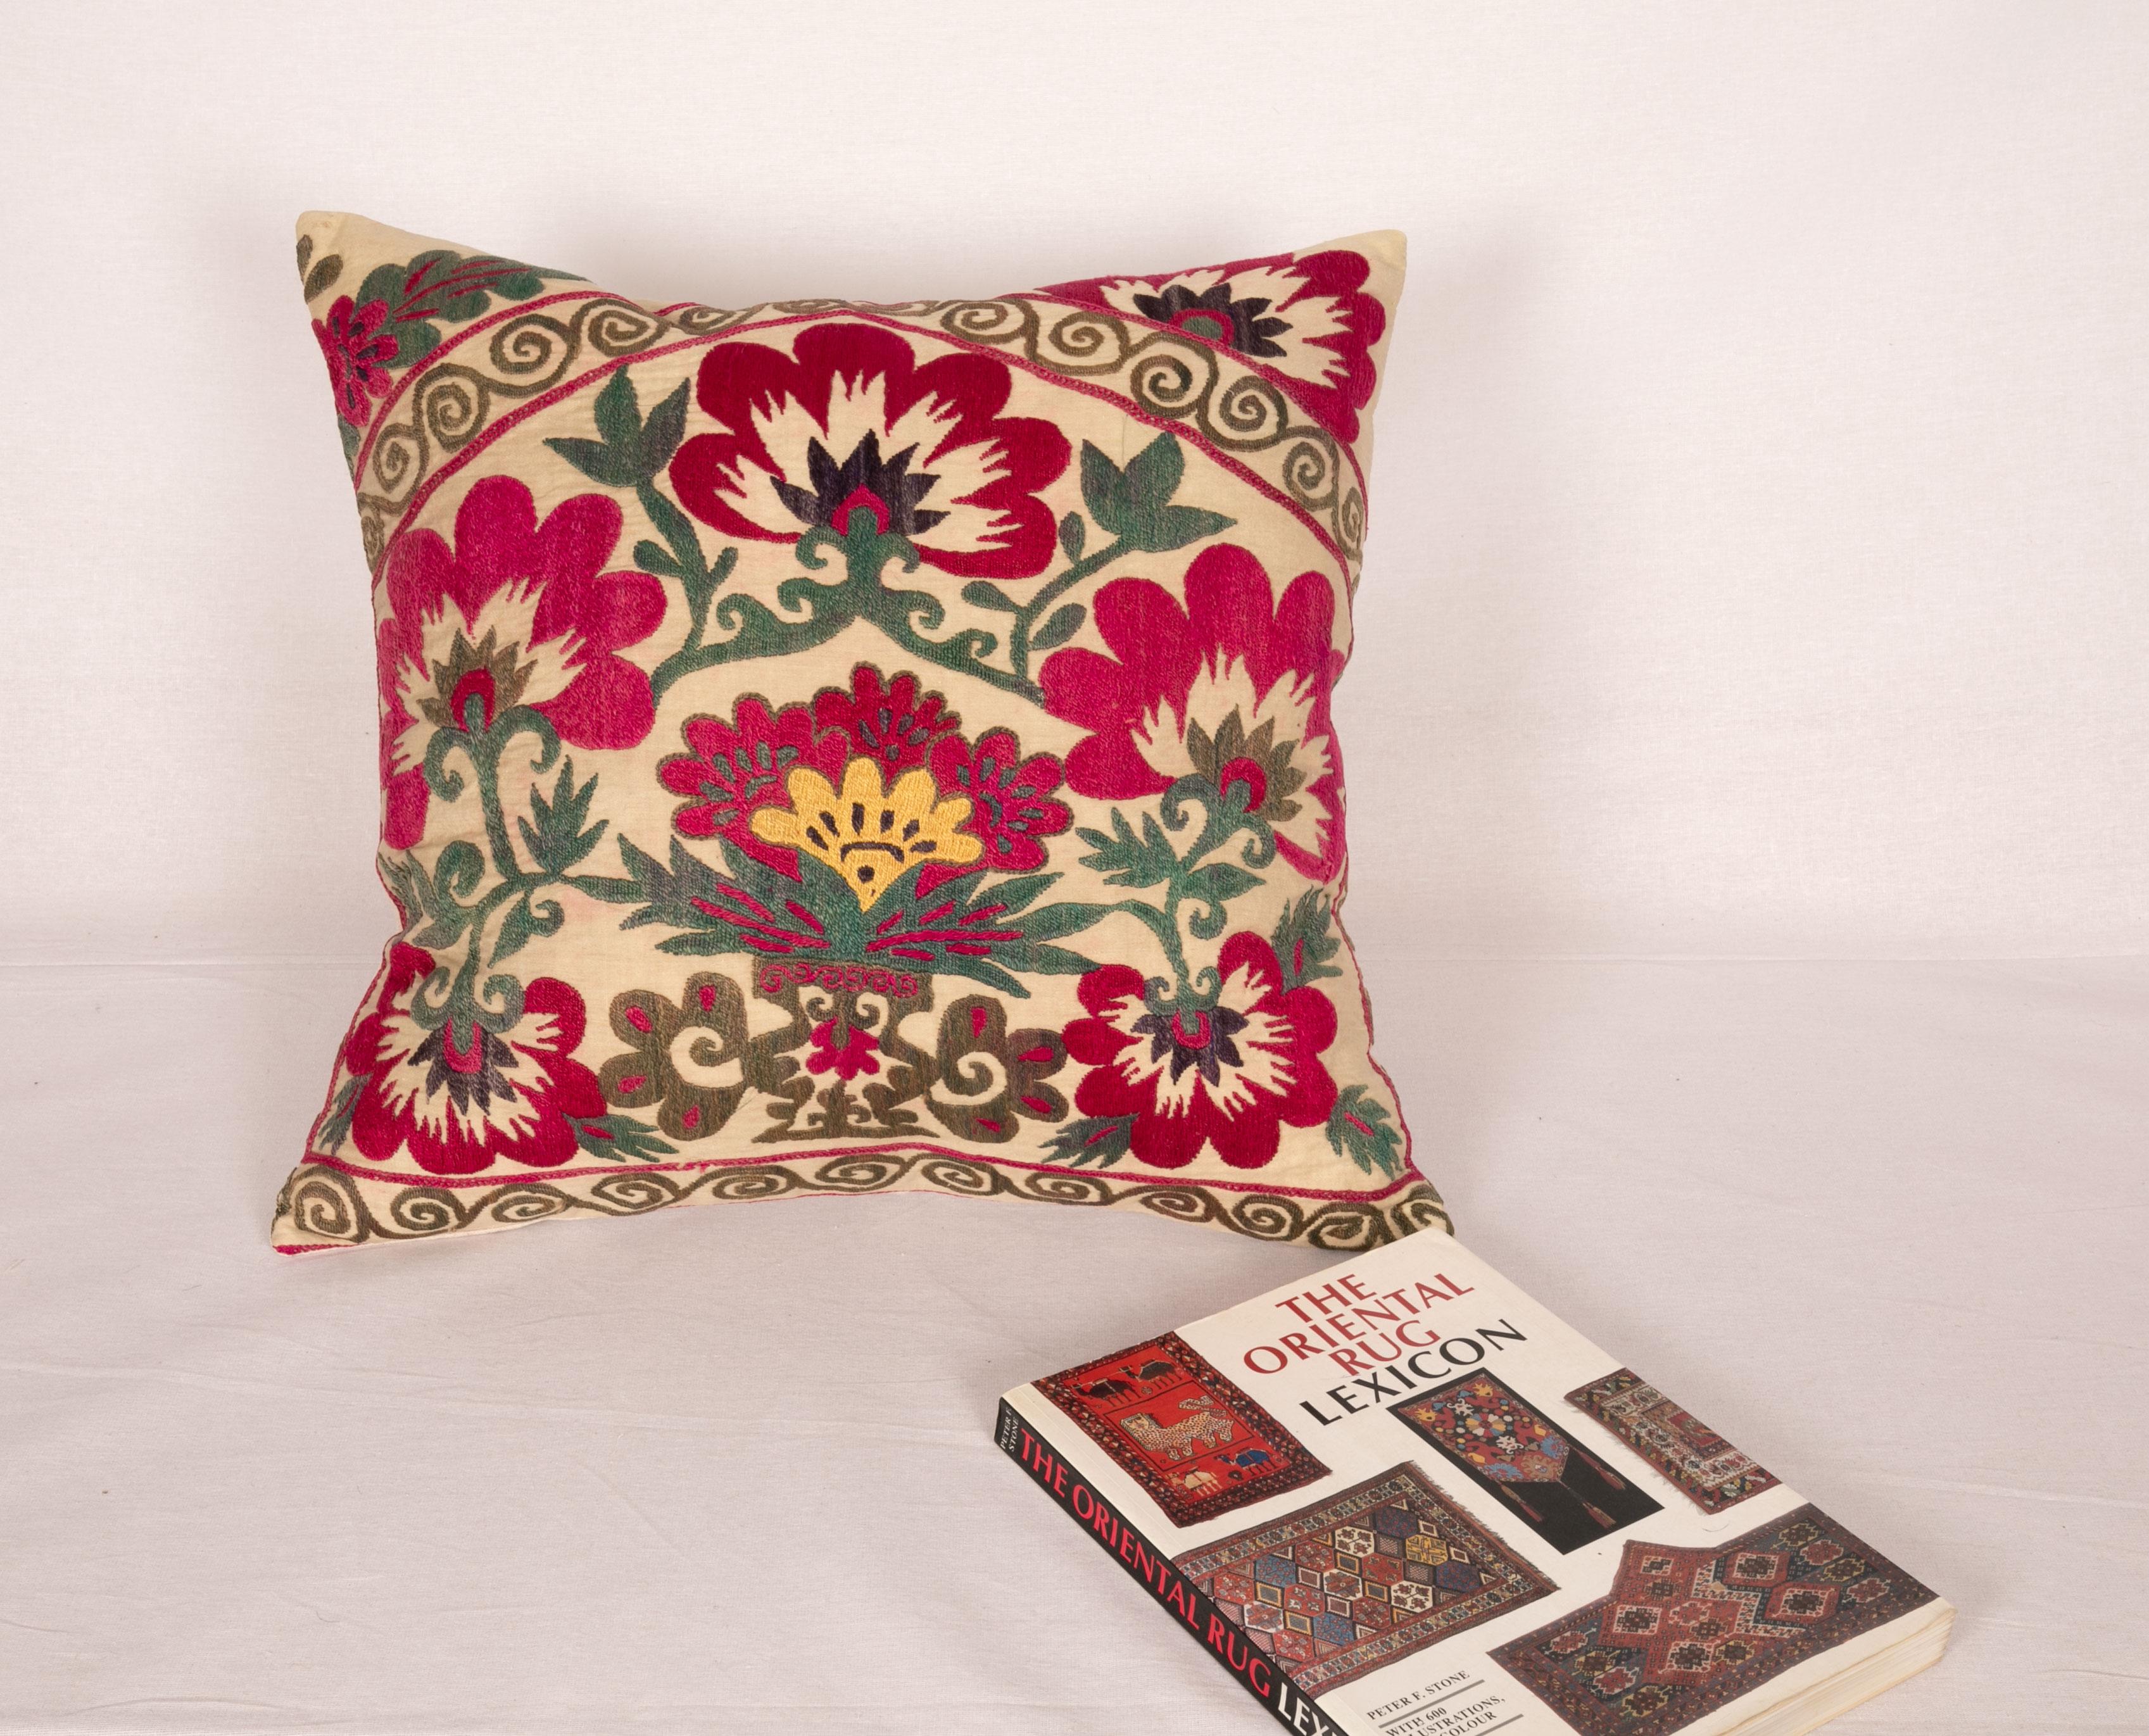 Embroidered Suzani Pillow Cover Made from a Vintage Suzani, Uzbekistan, 1970s